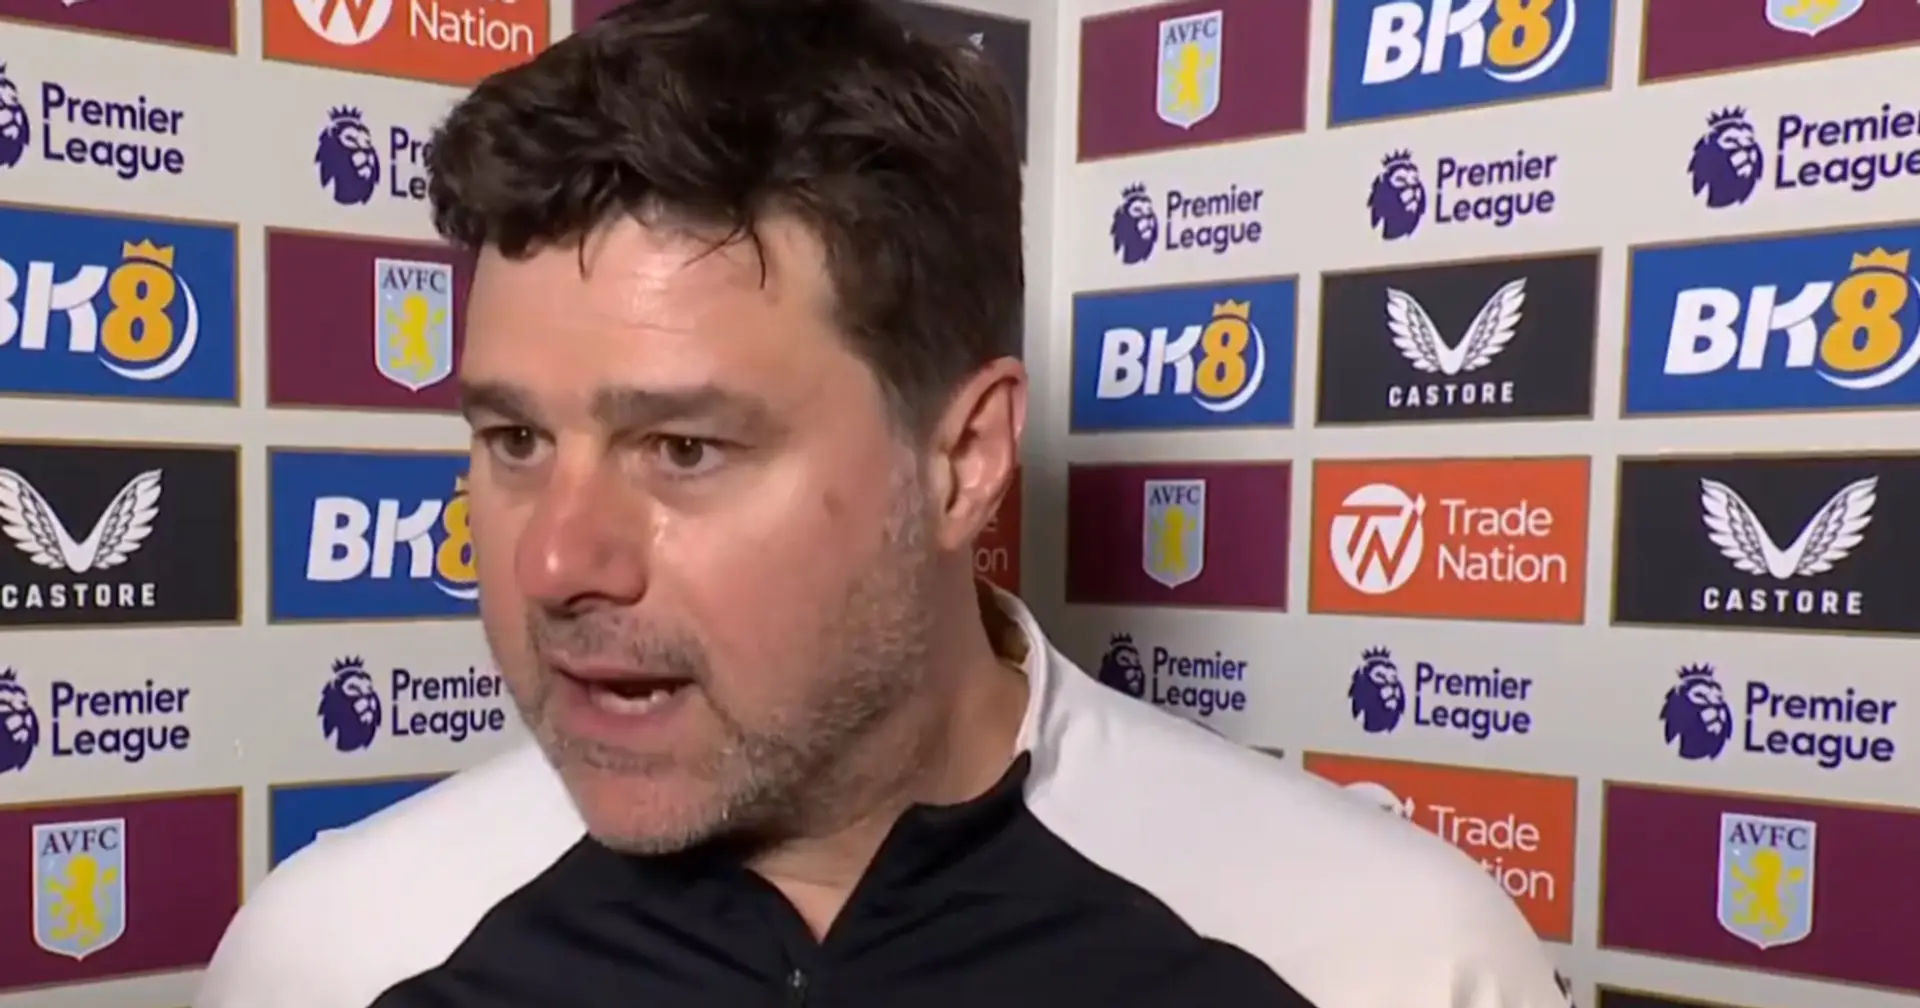 'Enough of these stupid rumours': Pochettino reacts to another question on his future